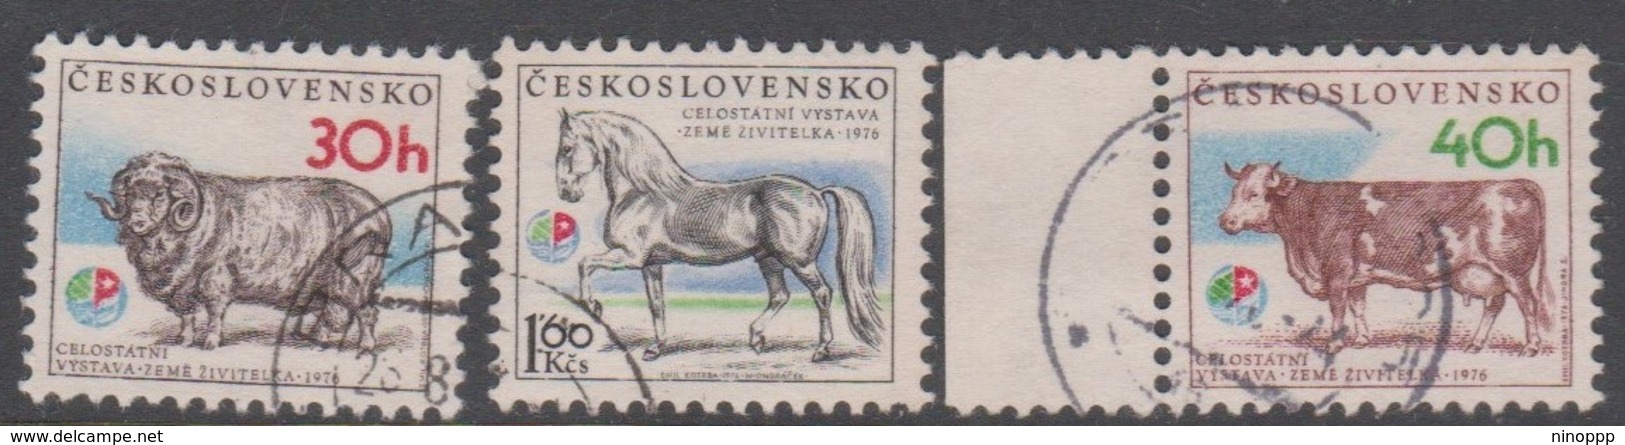 Czechoslovakia Scott 2077-2079 1976 Earth Exhibition, Used - Used Stamps